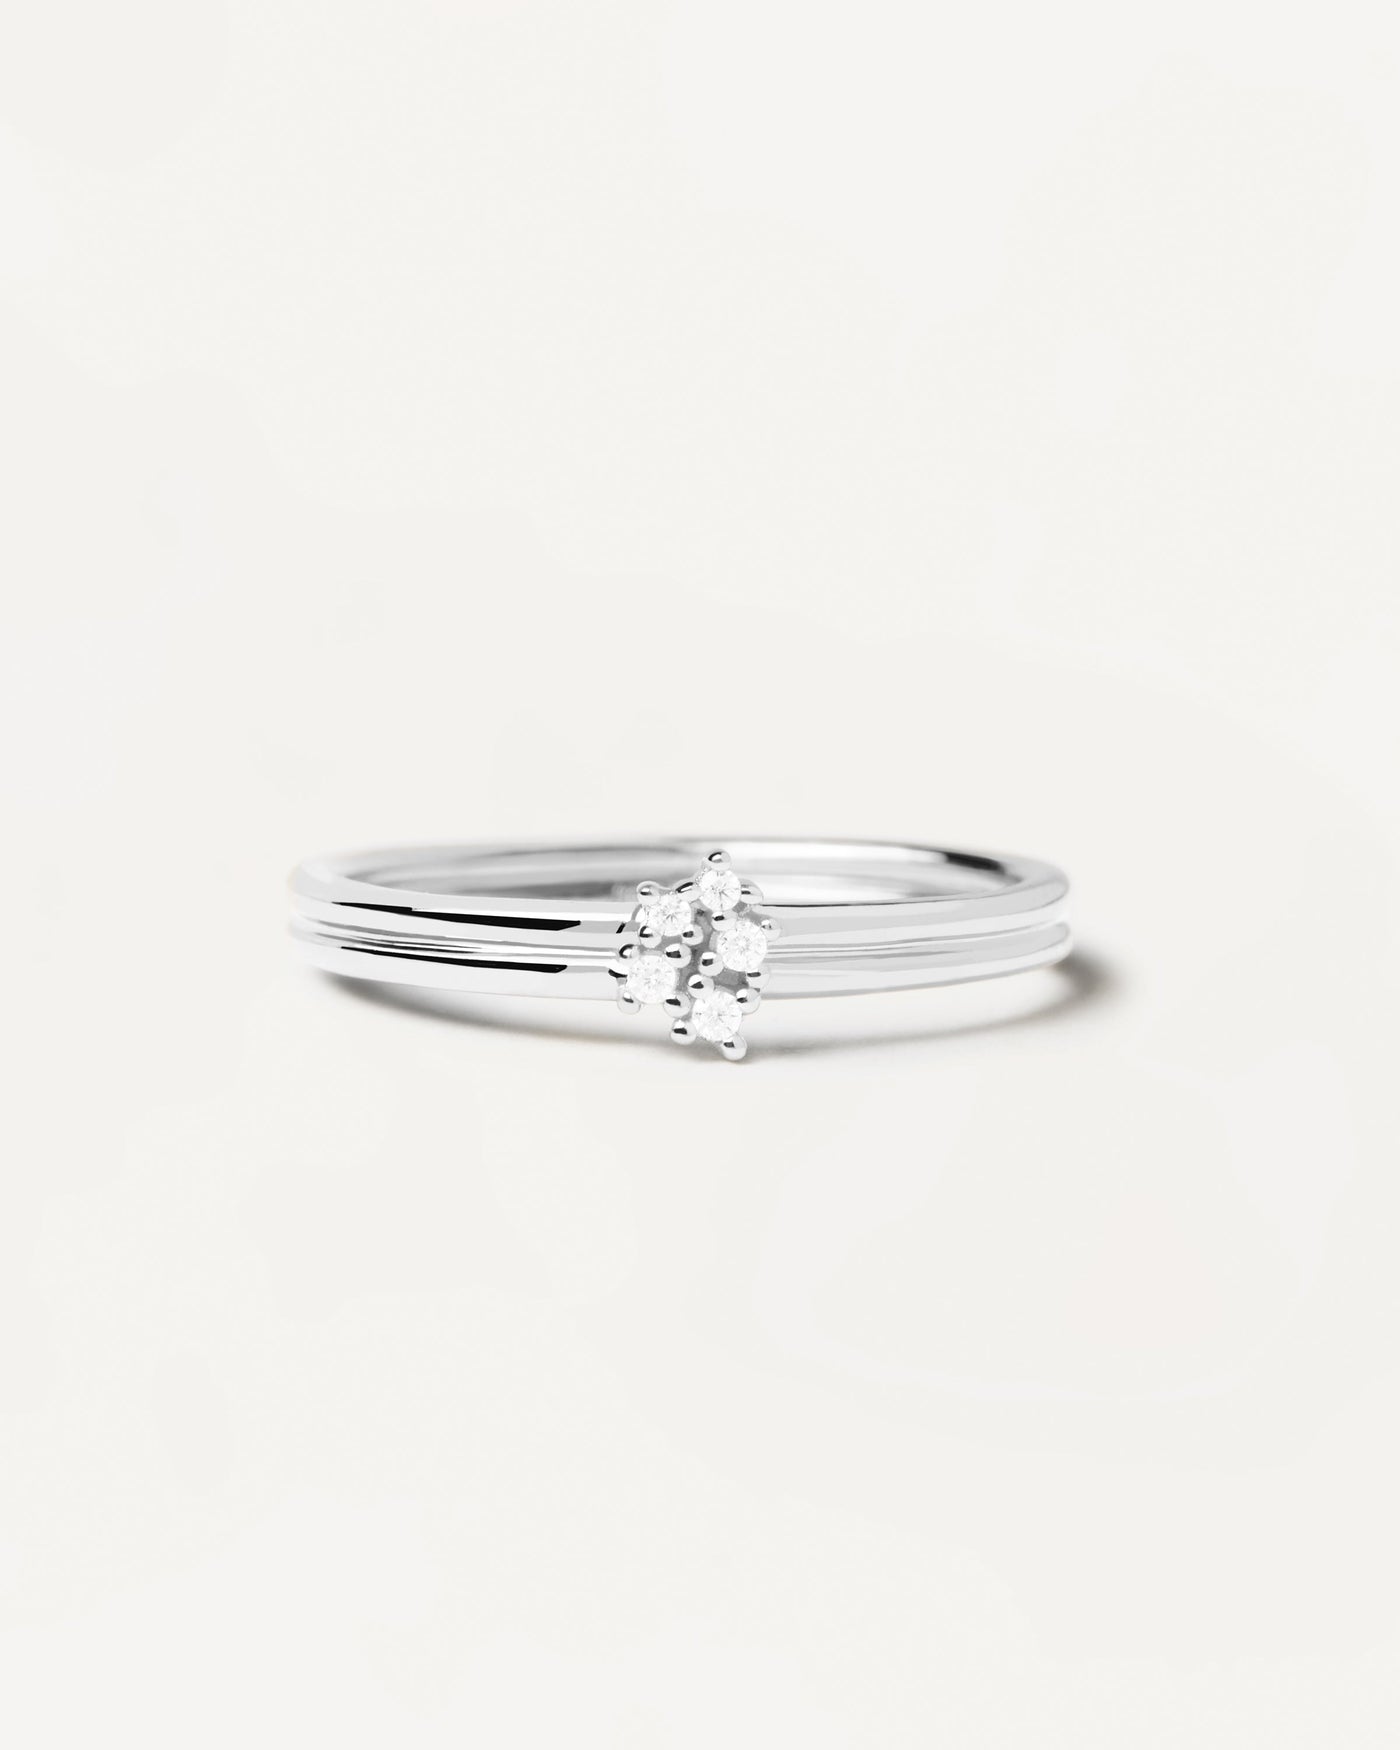 2023 Selection | Nova Silver Ring. Sterling silver ring with two bands set with five dainty zirconias. Get the latest arrival from PDPAOLA. Place your order safely and get this Best Seller. Free Shipping.